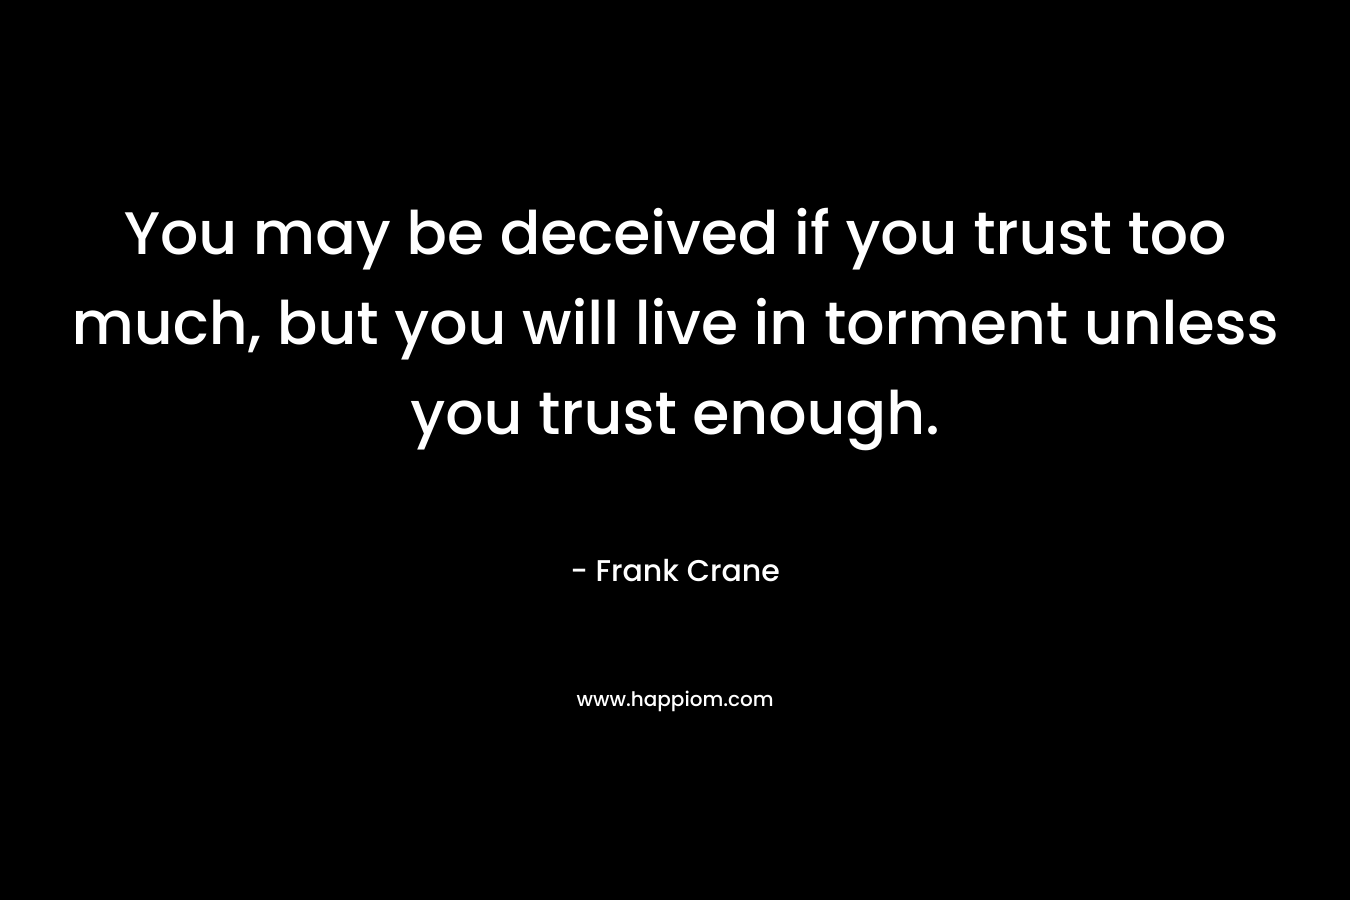 You may be deceived if you trust too much, but you will live in torment unless you trust enough. – Frank Crane